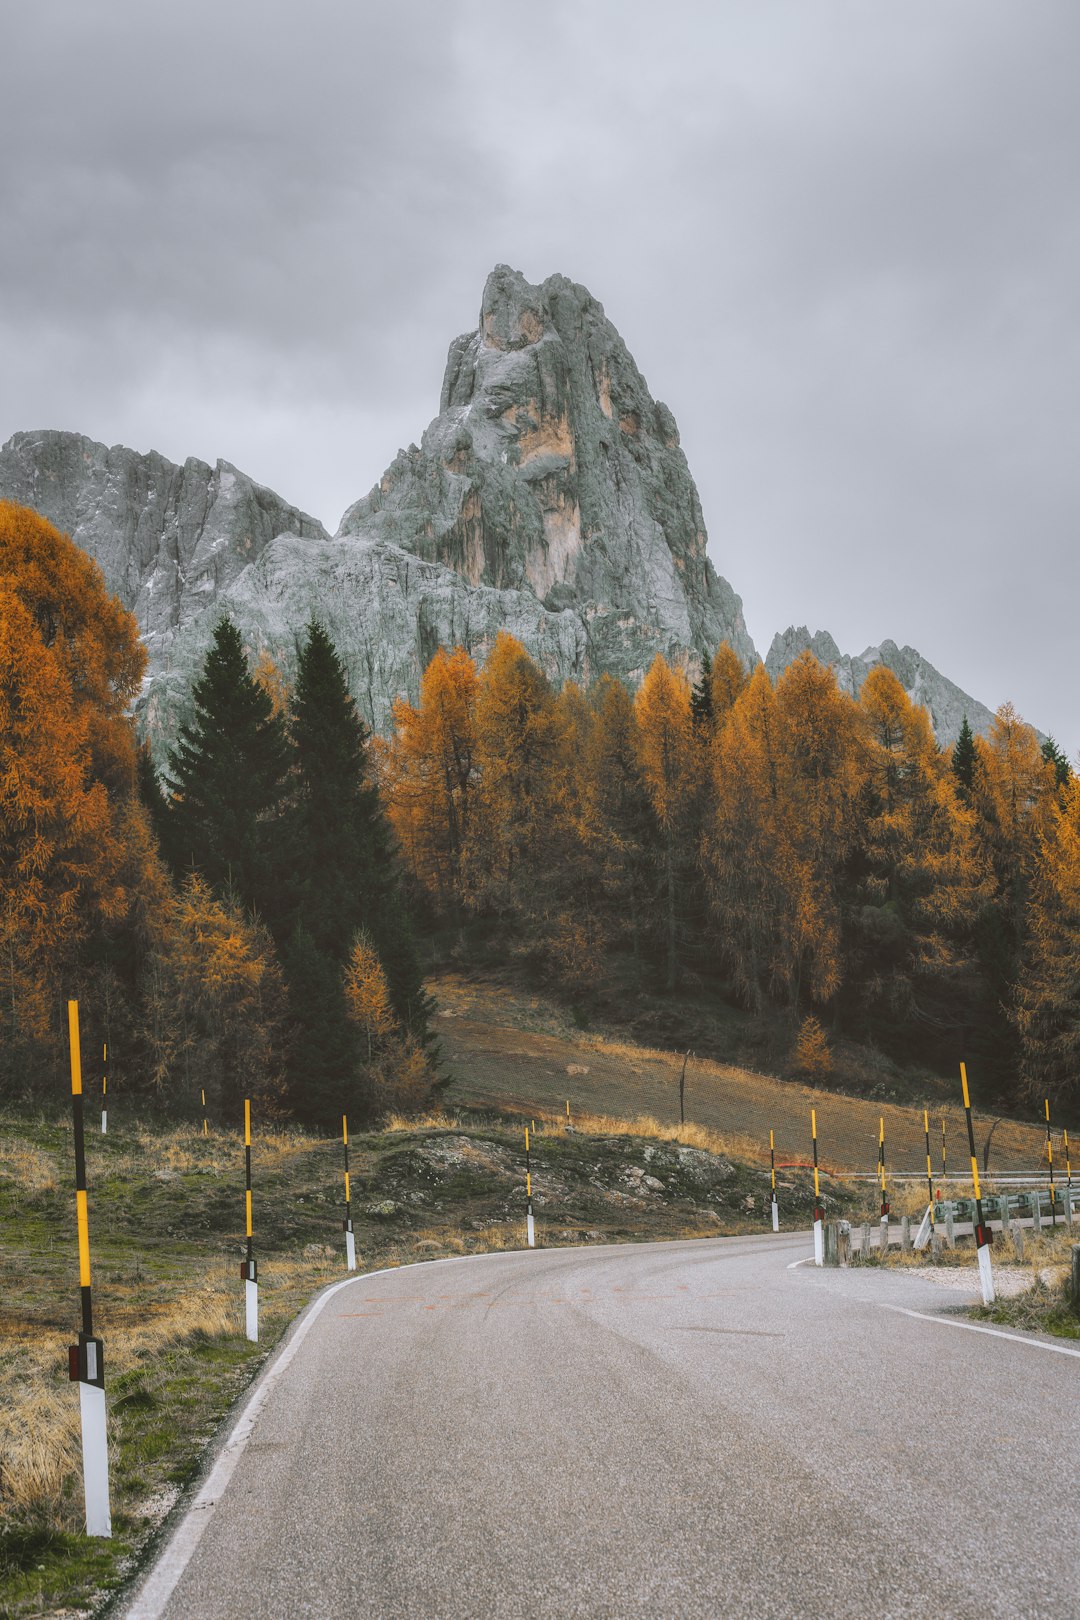 asphalt road and mountain scenery